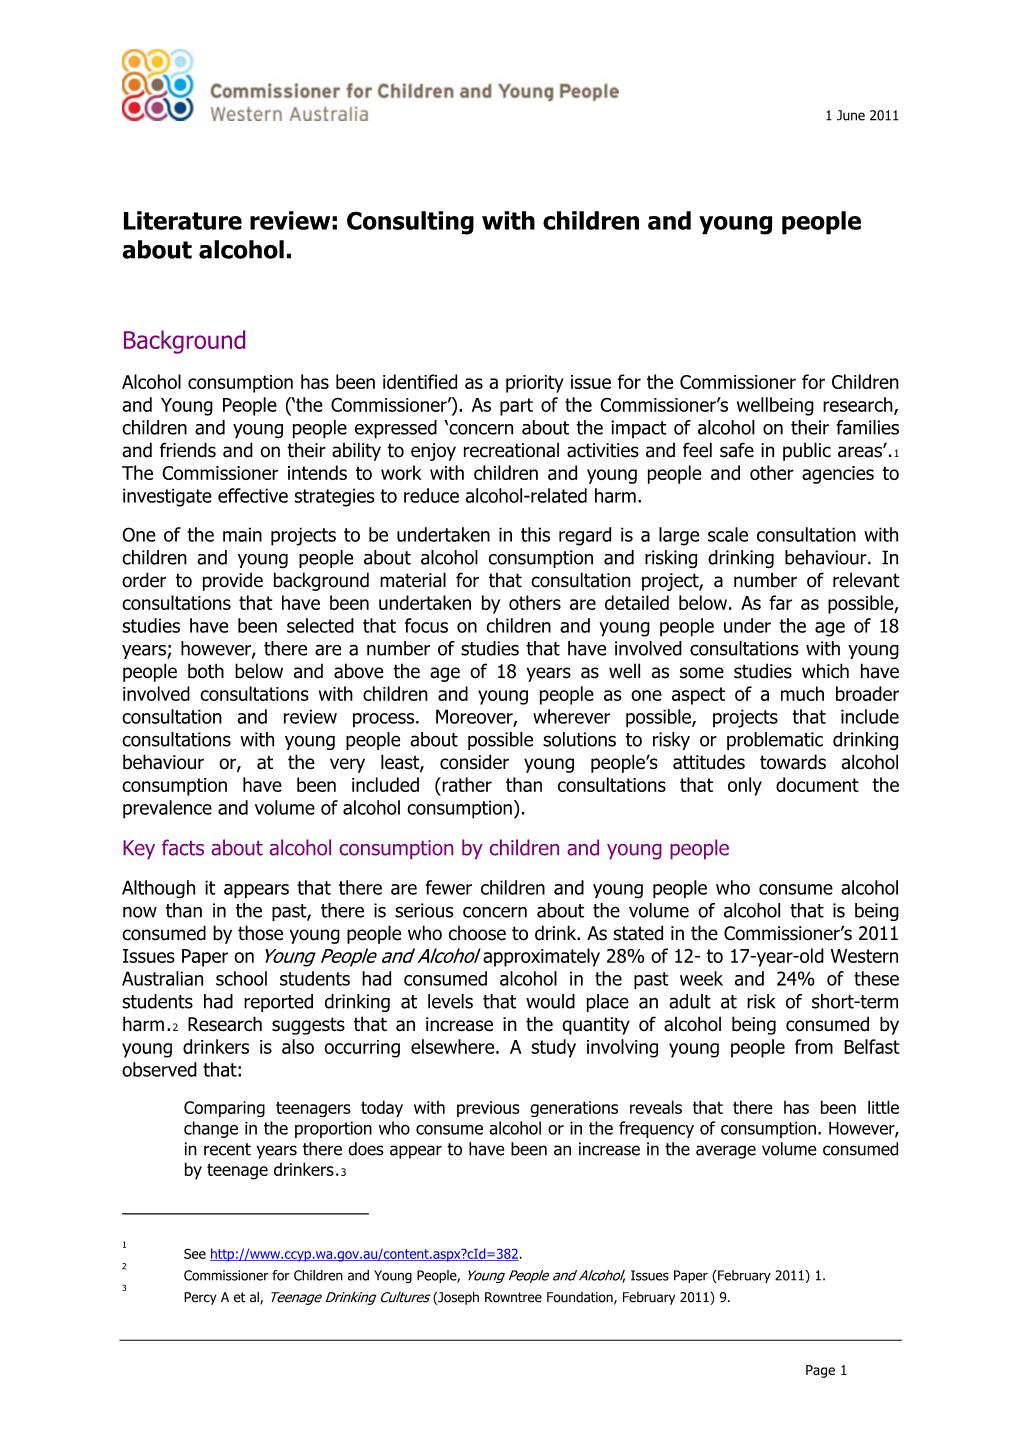 Consulting with Children and Young People About Alcohol